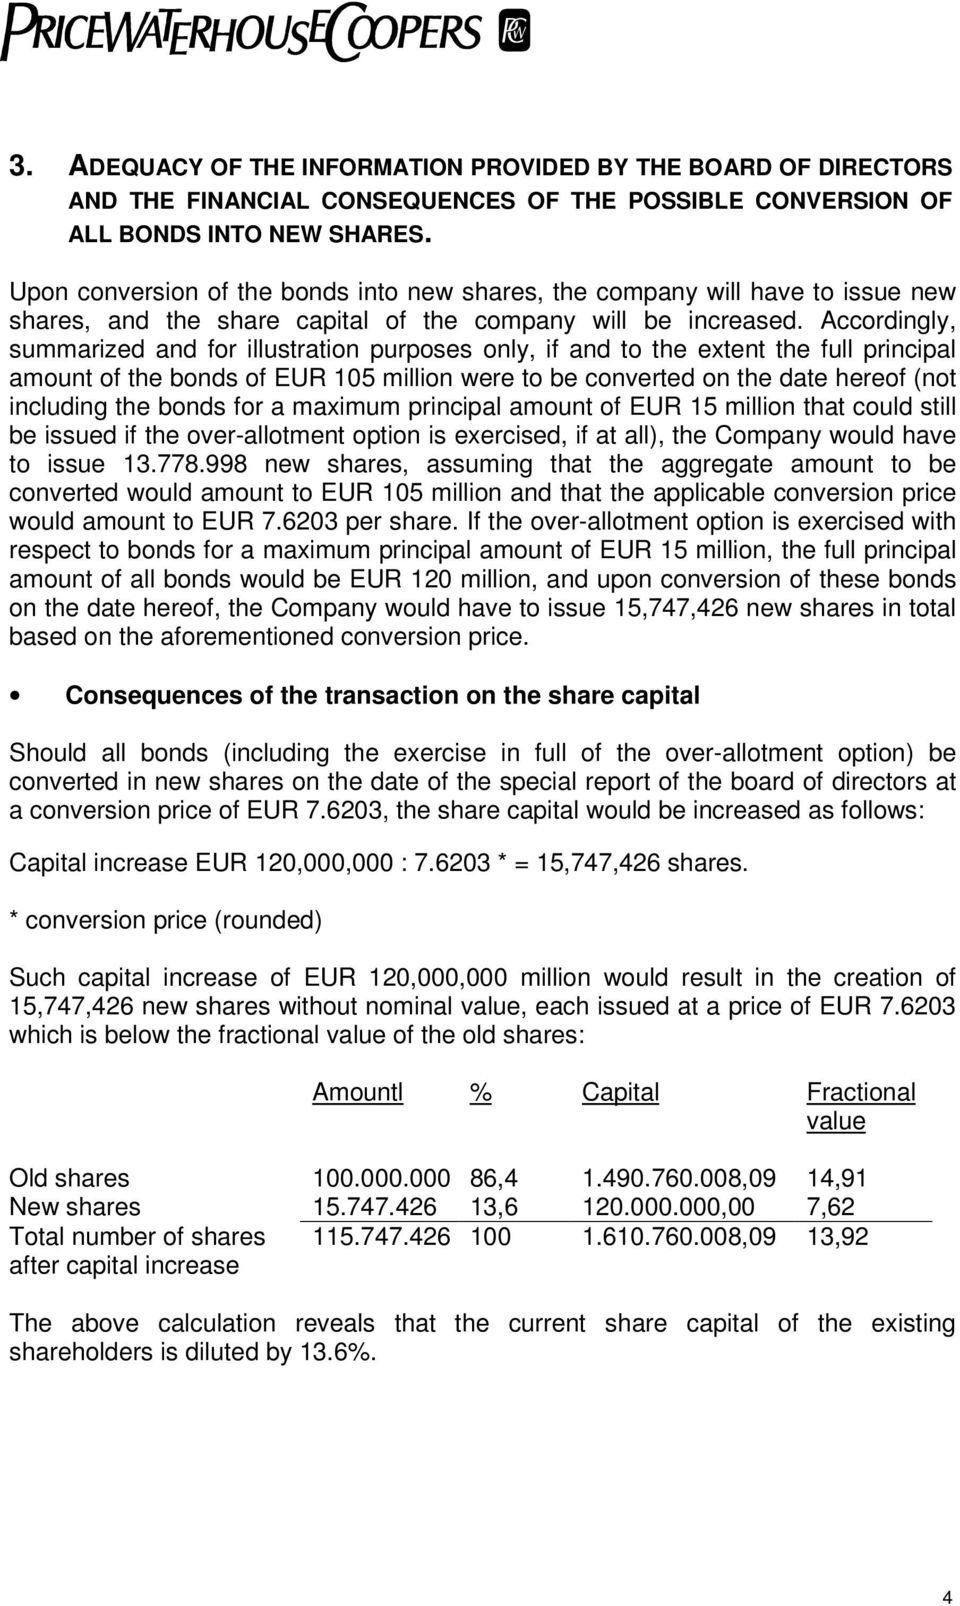 Accordingly, summarized and for illustration purposes only, if and to the extent the full principal amount of the bonds of EUR 105 million were to be converted on the date hereof (not including the